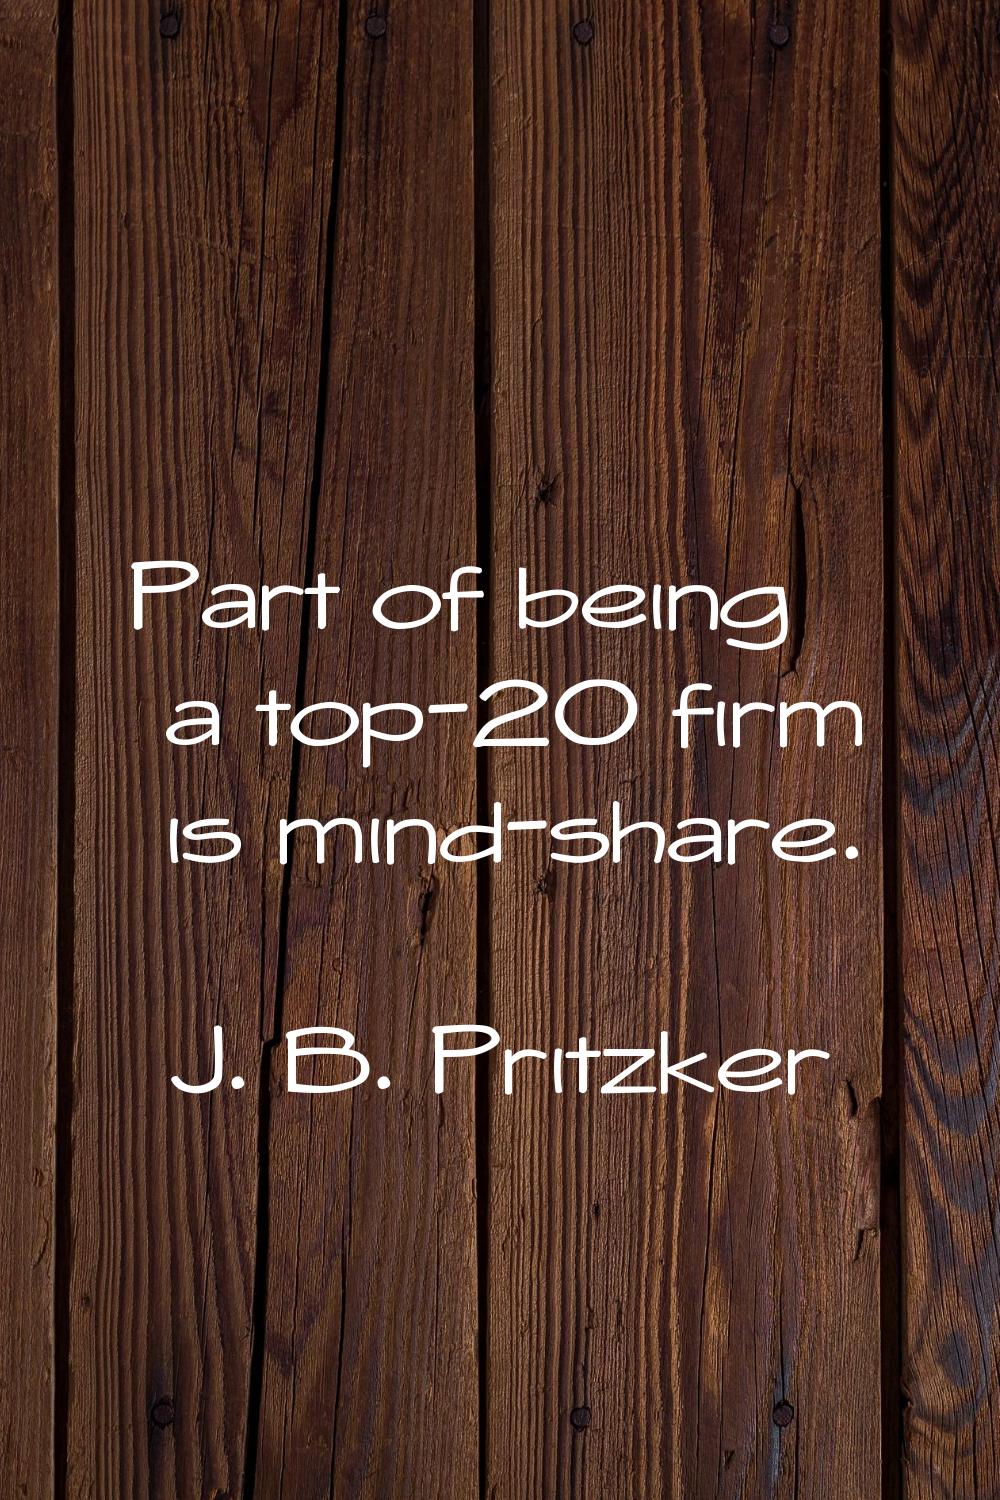 Part of being a top-20 firm is mind-share.